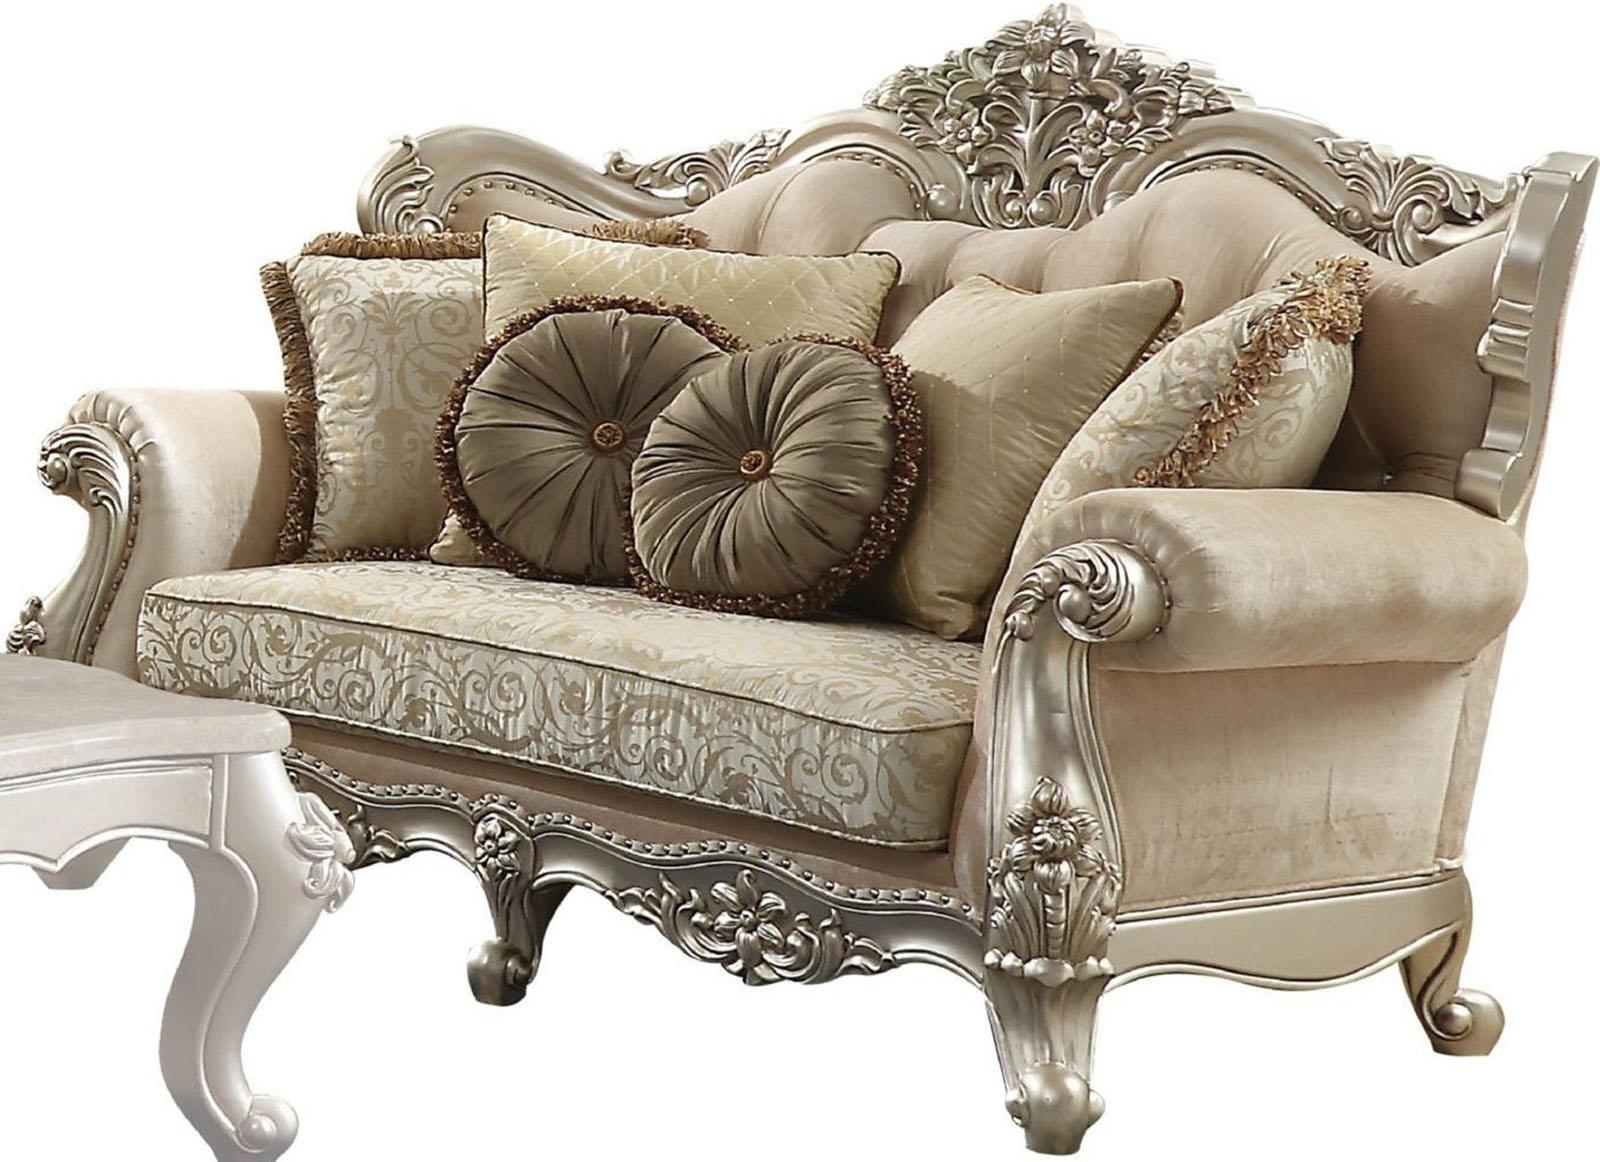 Acme Furniture Bently Loveseat with 5 Pillows in Champagne 50661  Half Price Furniture